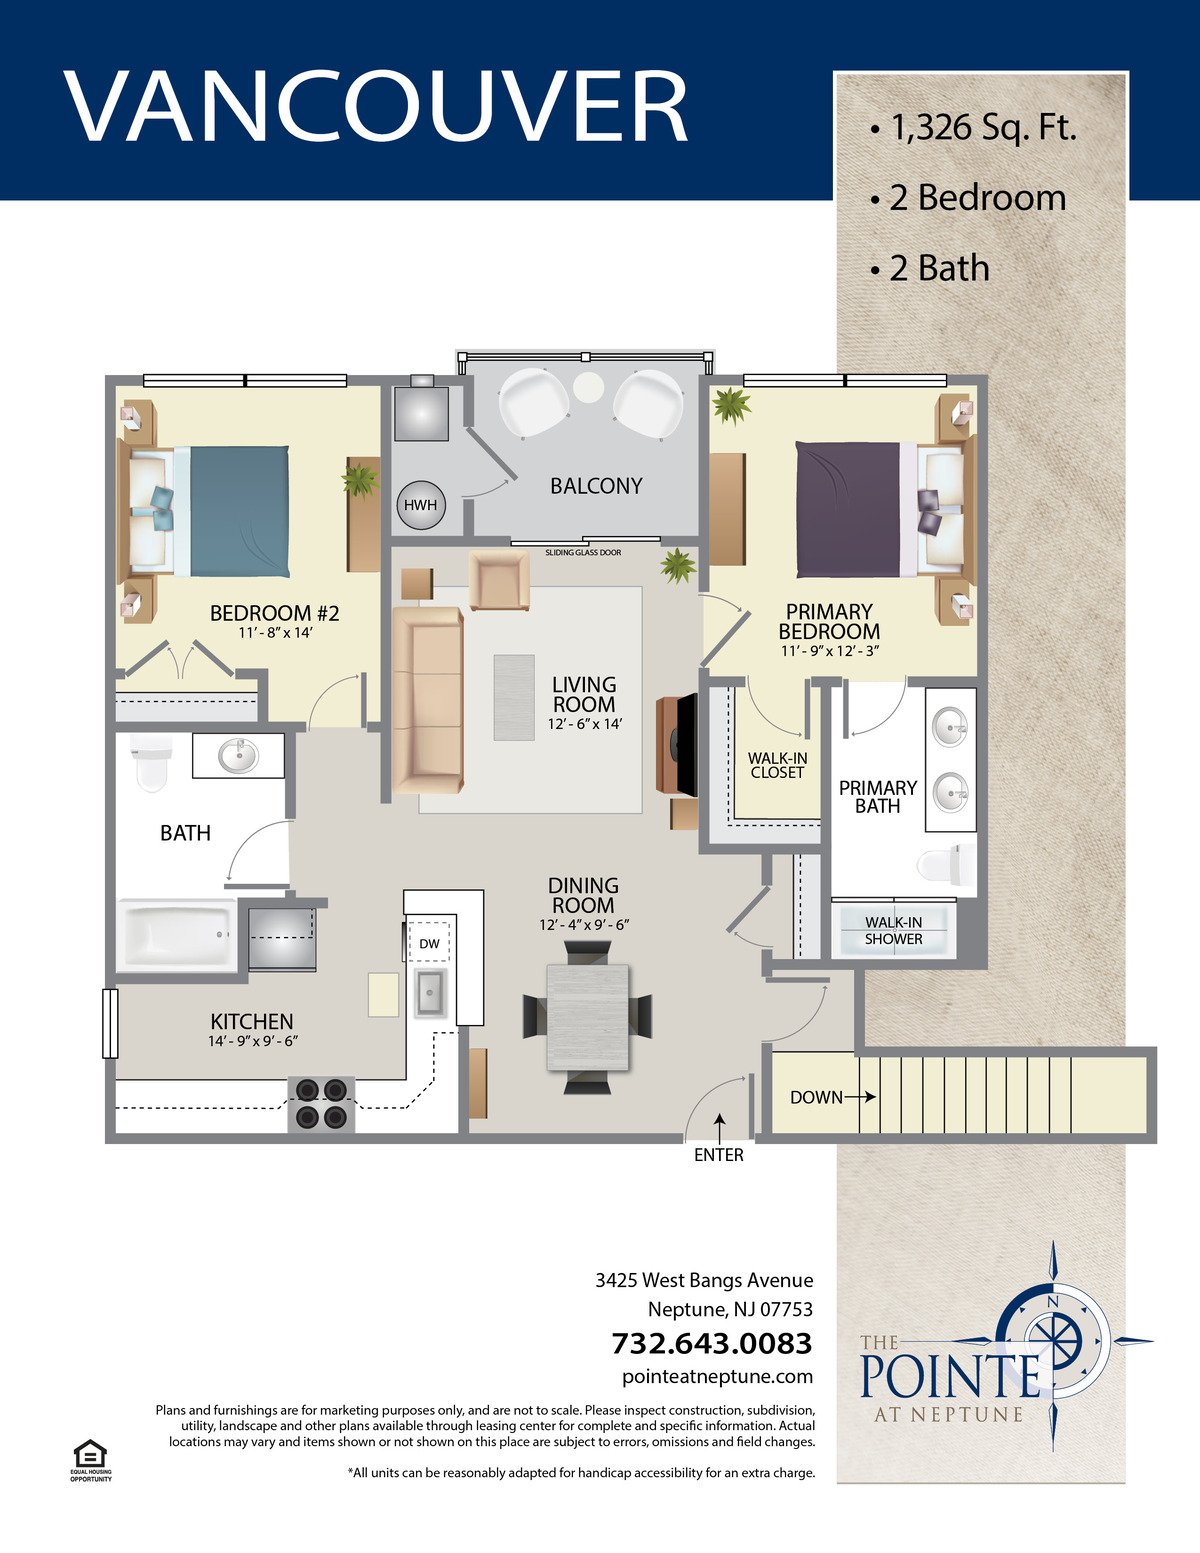 The Pointe At Neptune Floor Plan The Newport